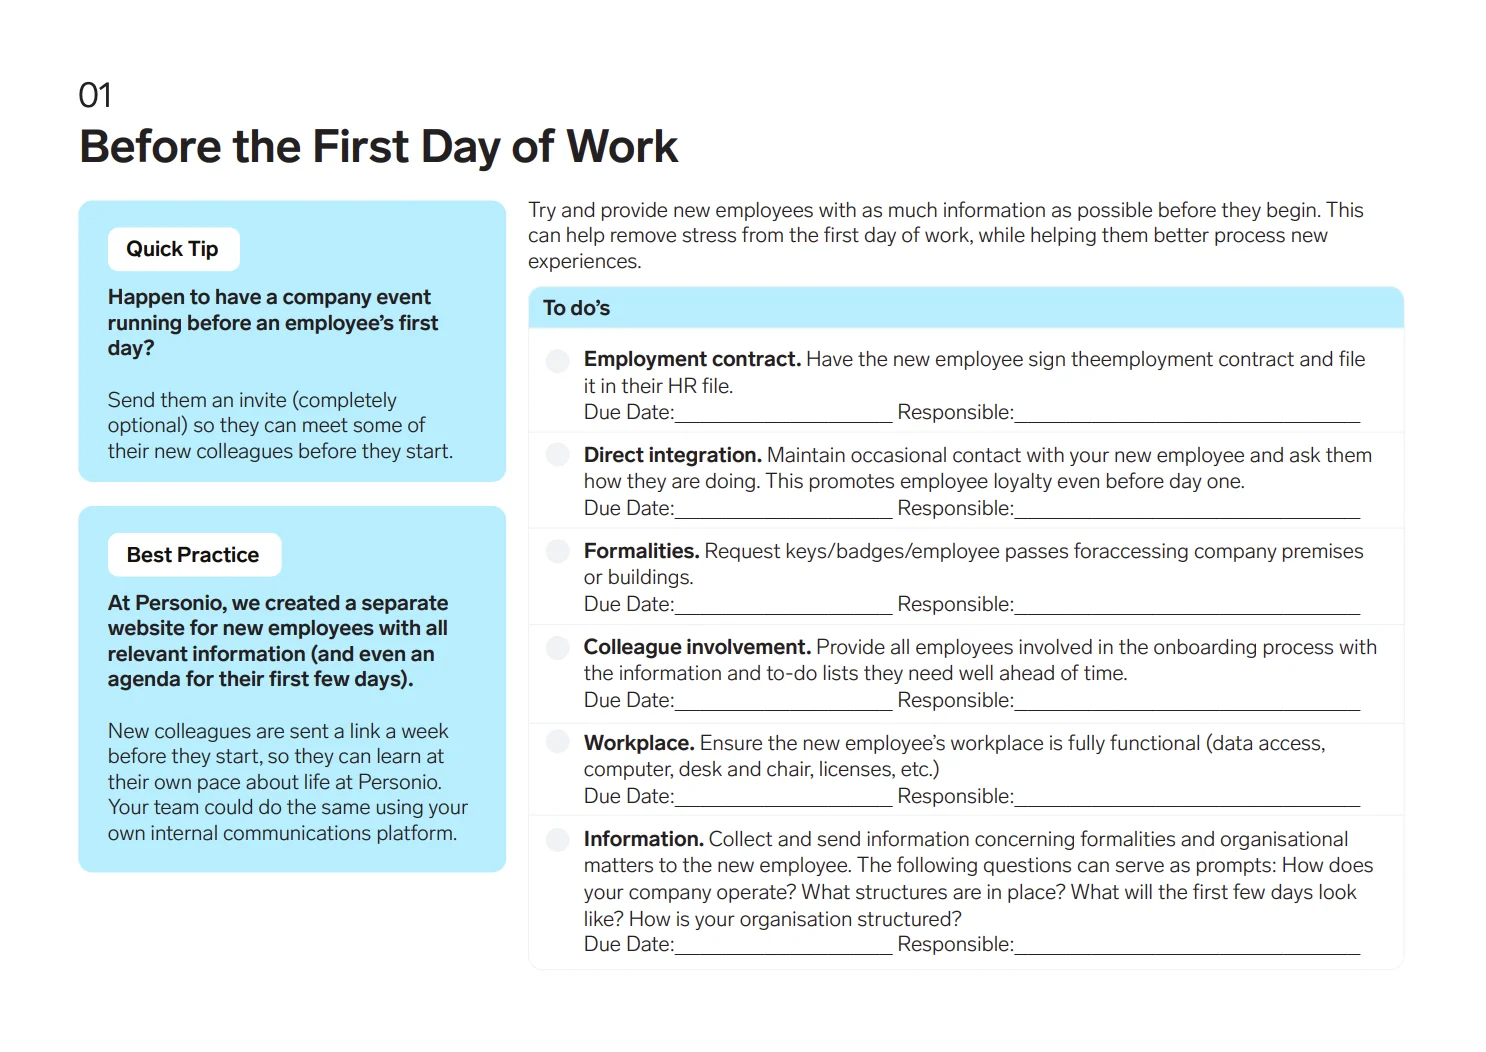 Employee Induction: How to Plan an Induction Day (+ Checklist)